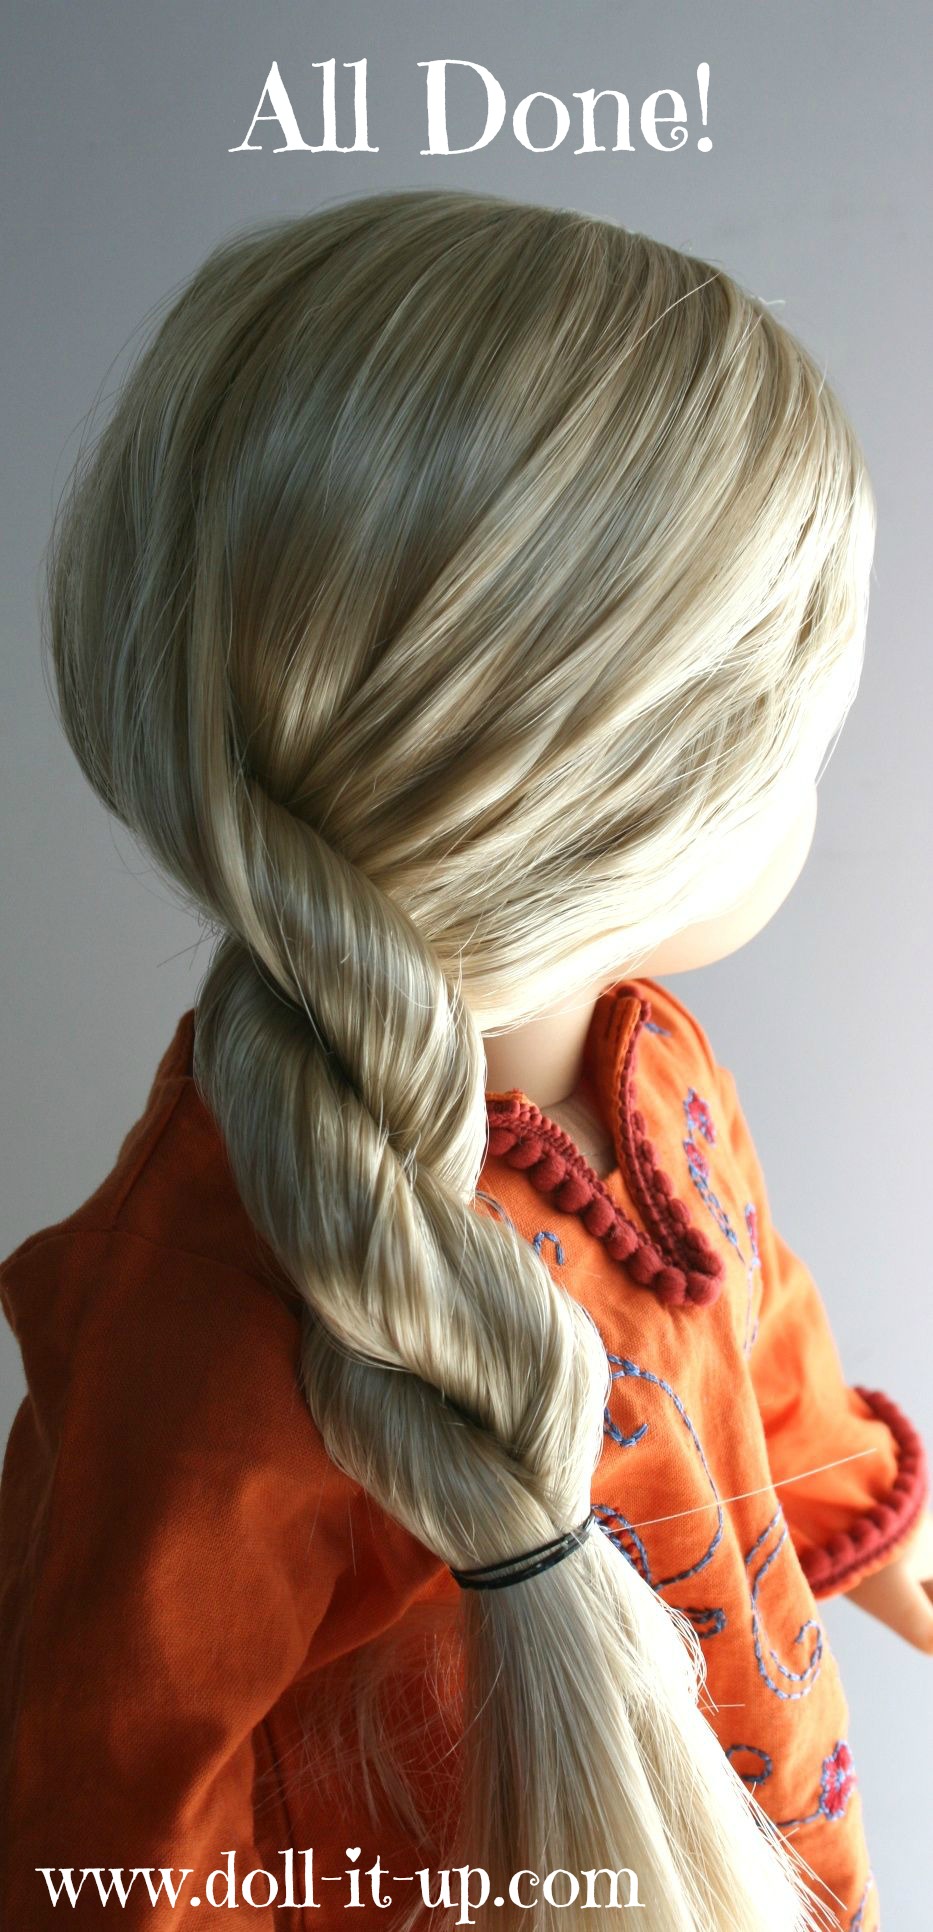 How to Rope Braid - Doll It Up